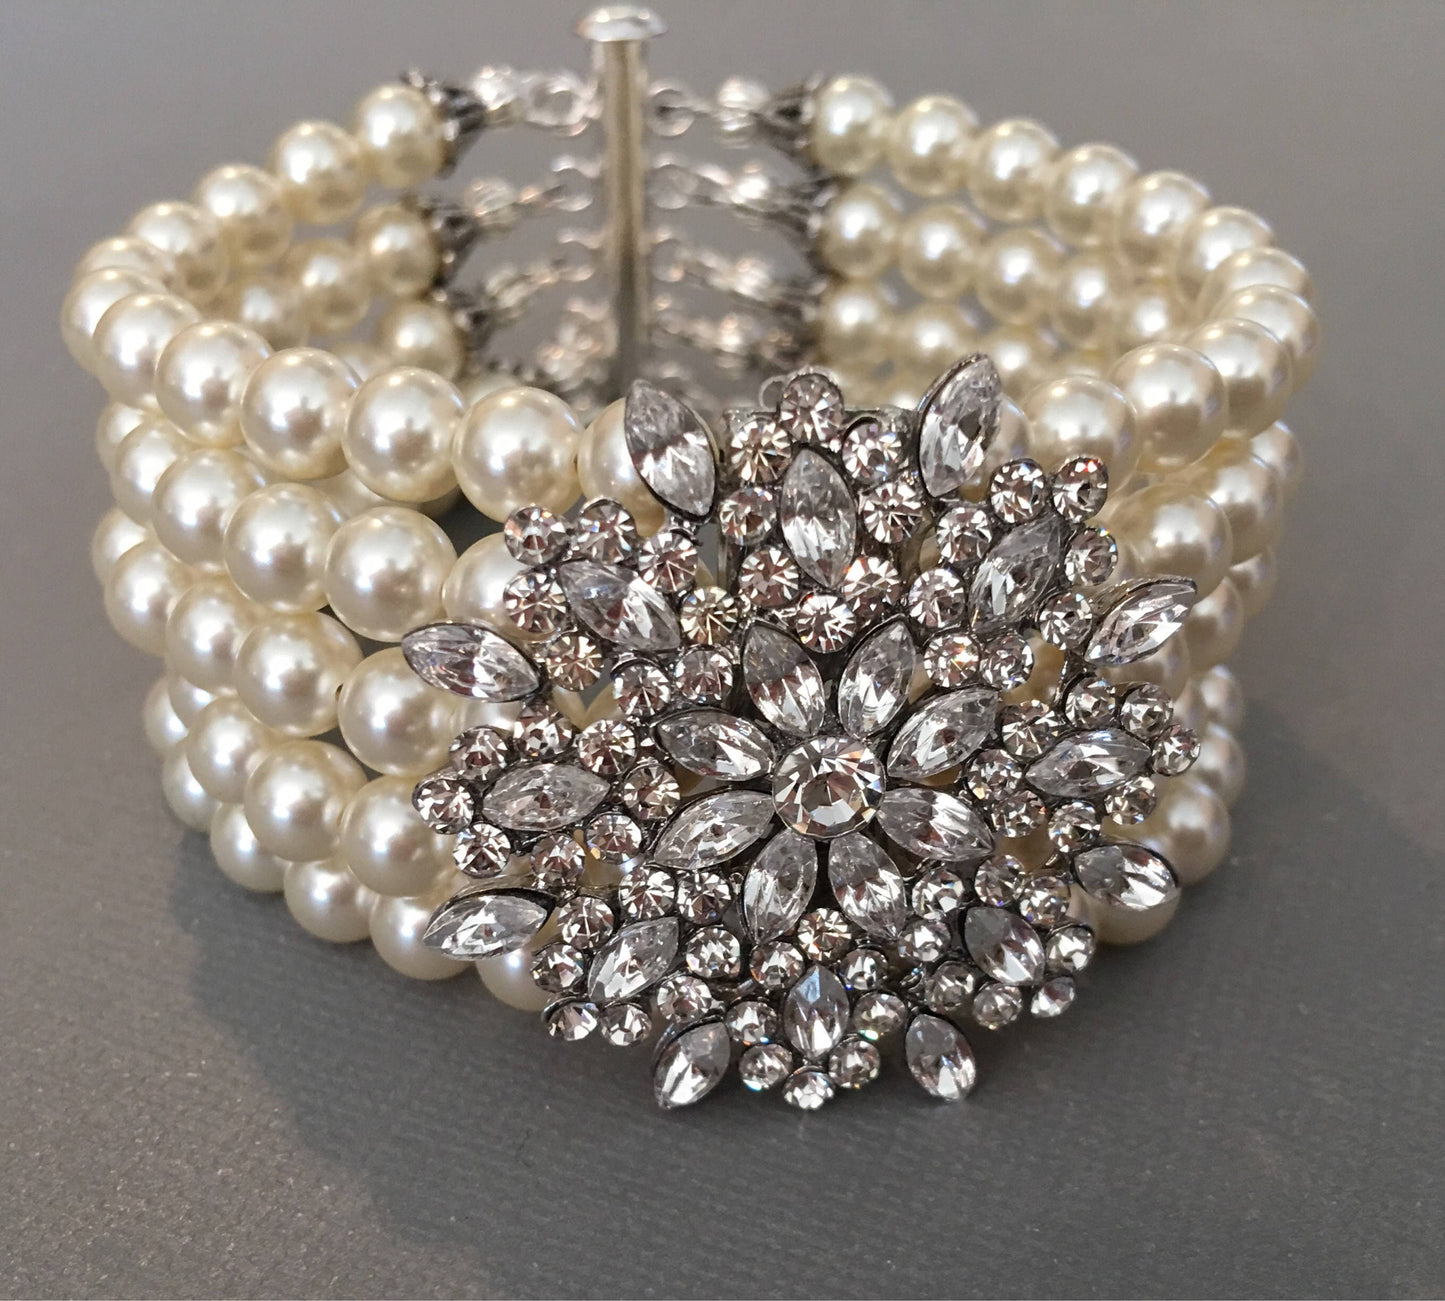 Pearl Bridal Bracelet with Cream Ivory Swarovski Pearls 5 multi strands and sparkling rhinestone Brooch wedding jewelry mother of the bride